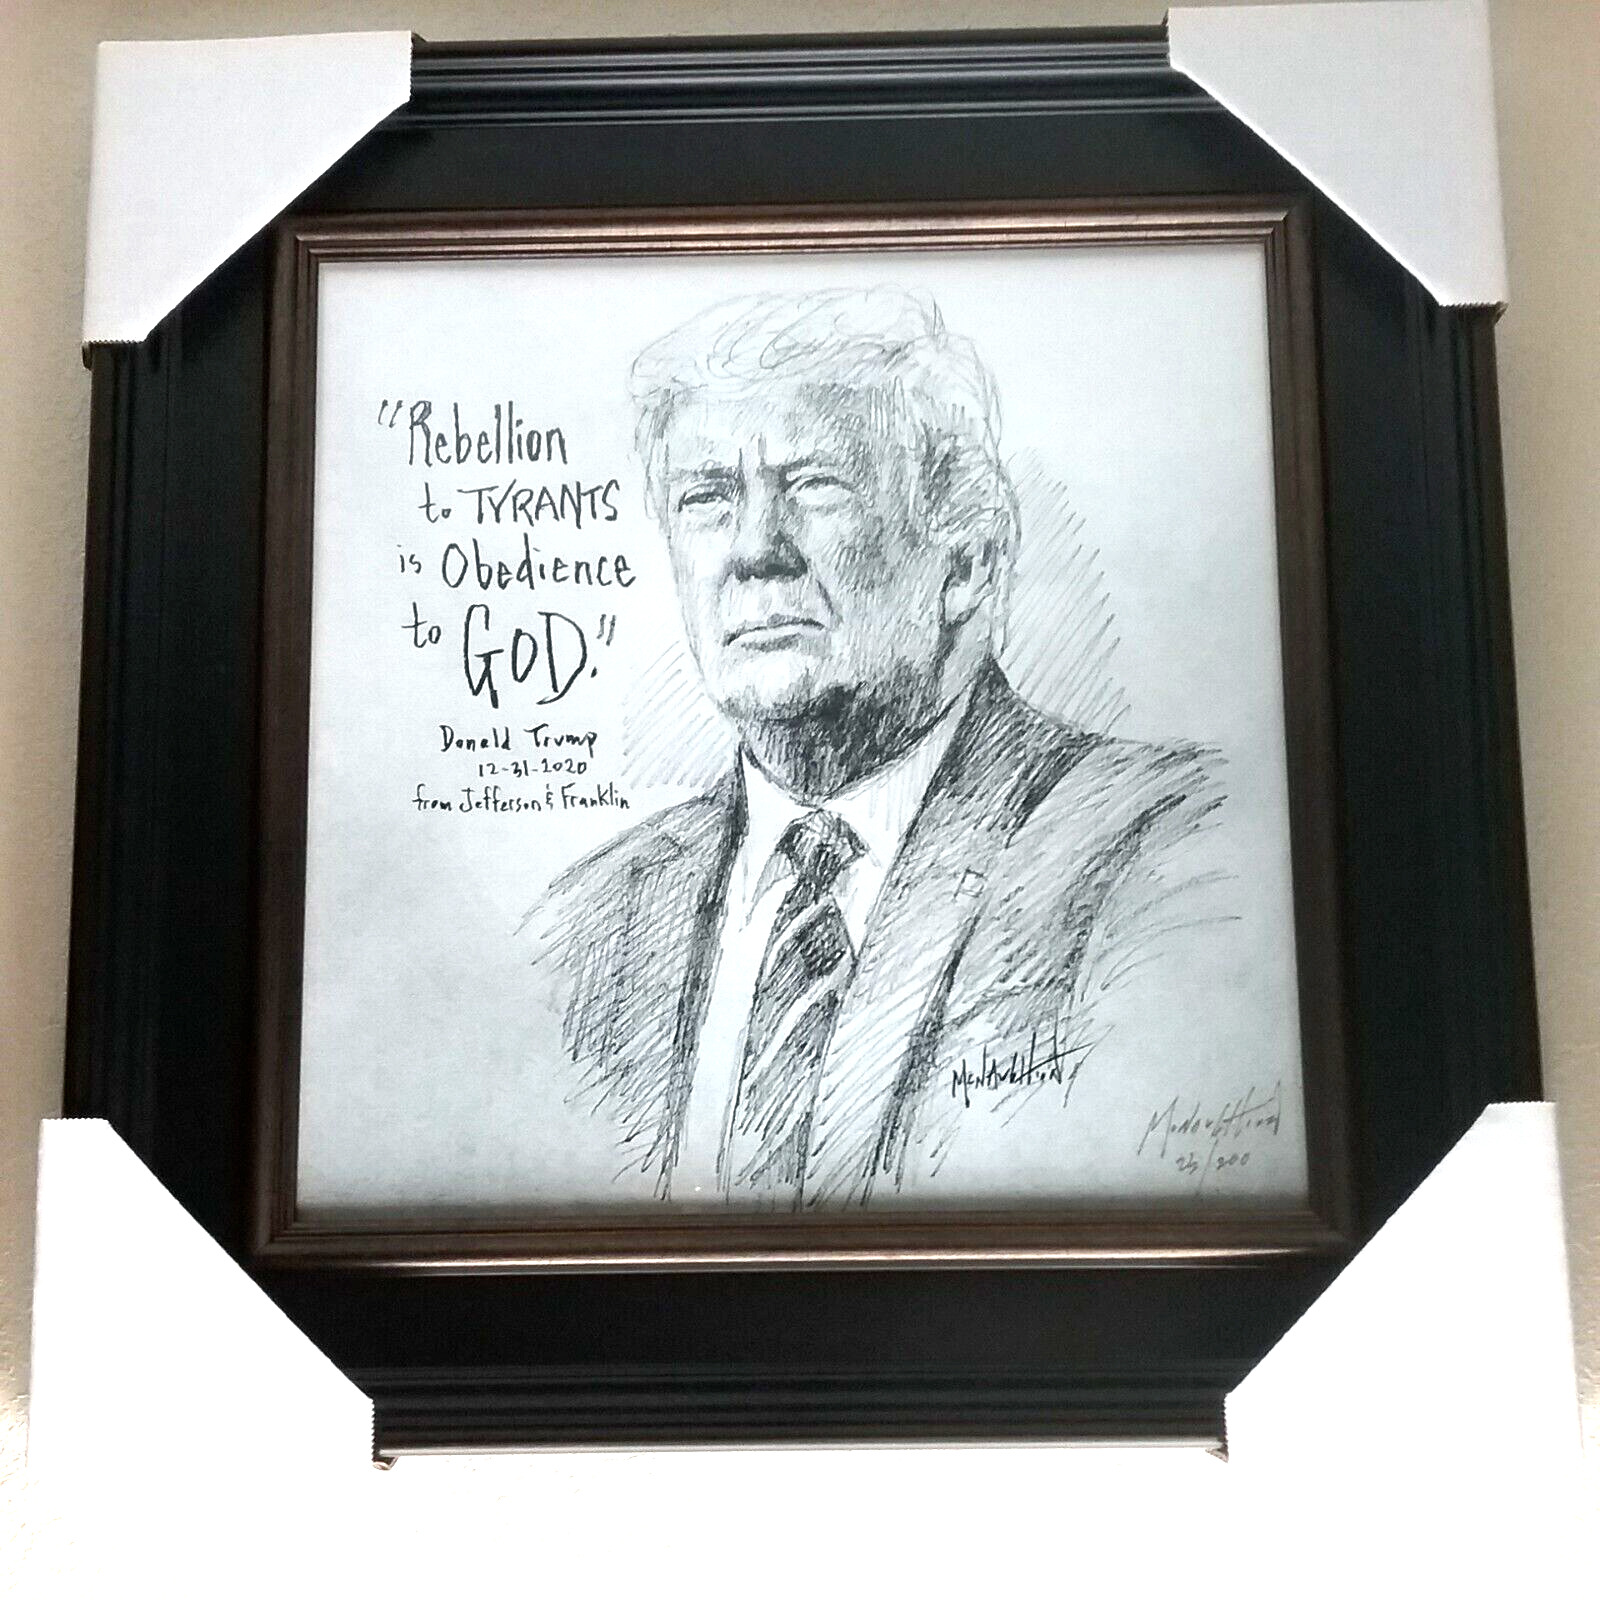 Donald Trump Drawing Personal Message Signed Dated 2020 Custom Frame 23/200